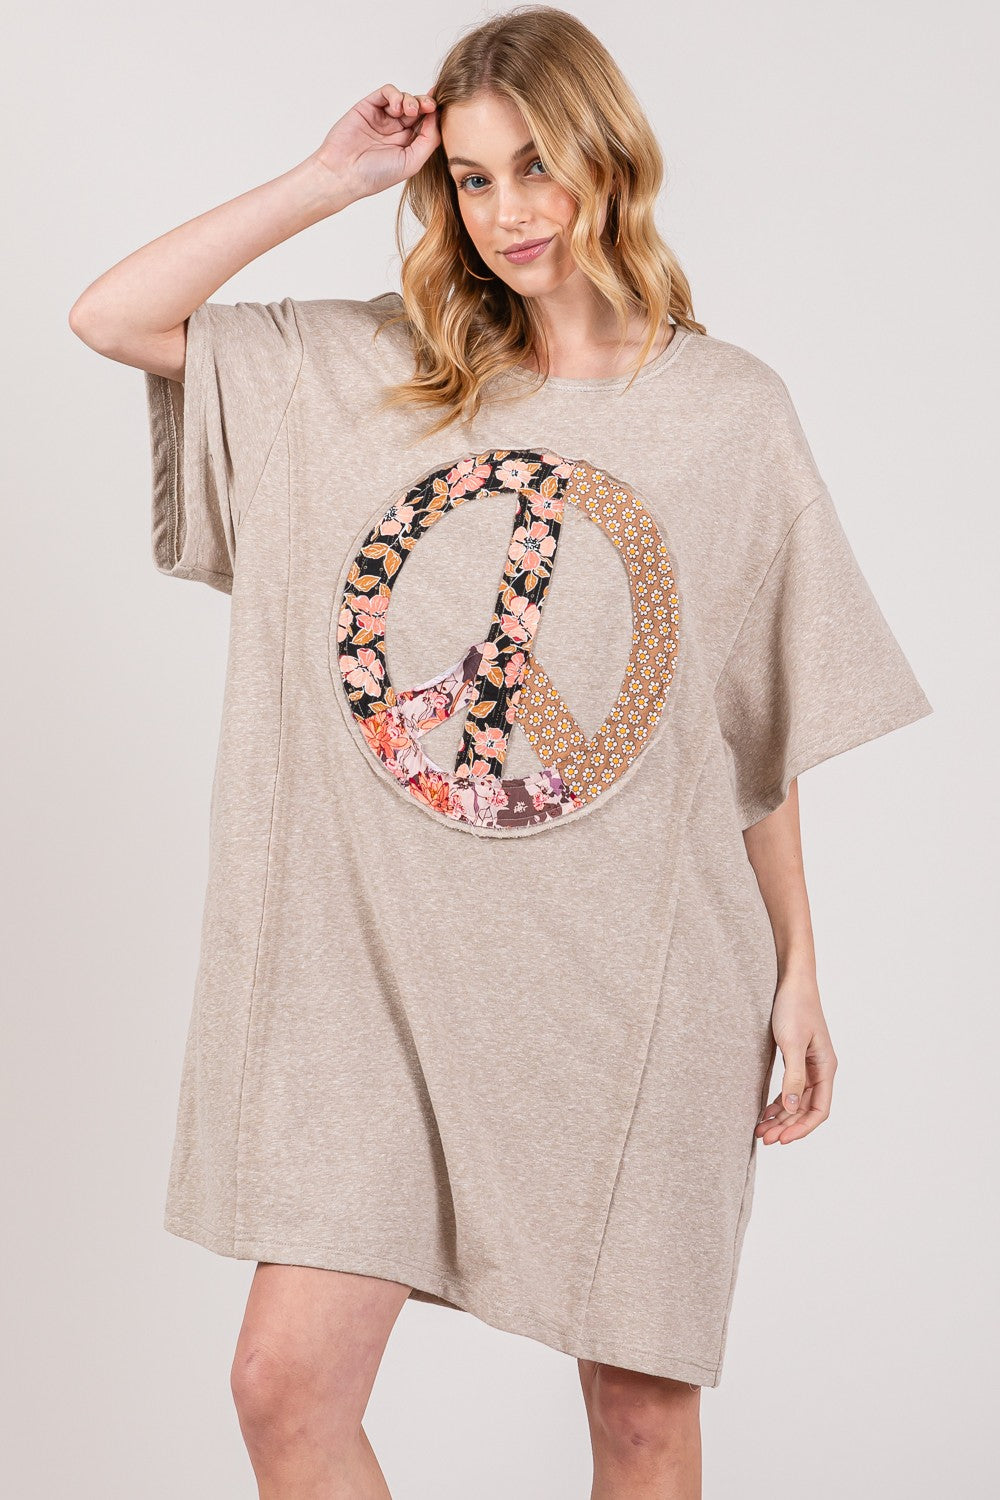 Sunset and Swim  Full Size Peace Sign Applique Short Sleeve Tee Dress Sunset and Swim Oatmeal S 